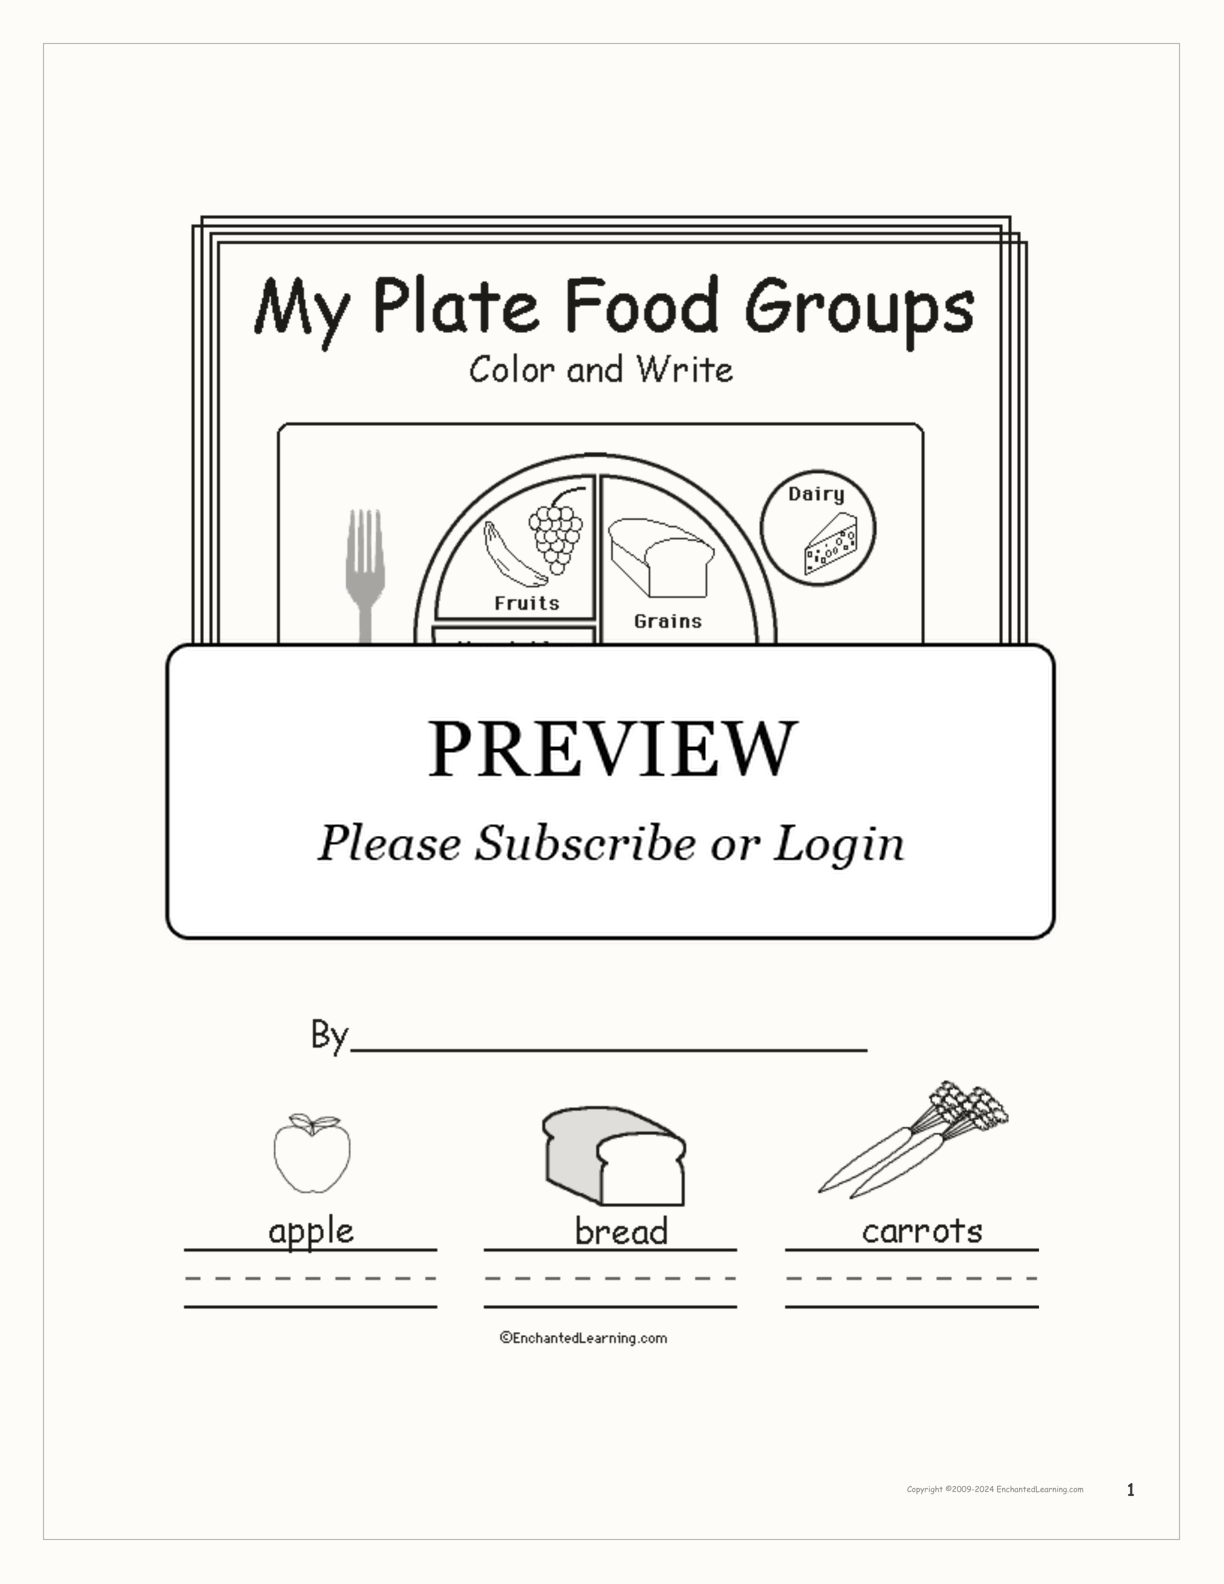 My Plate Food Groups (Color and Write Book) interactive printout page 1